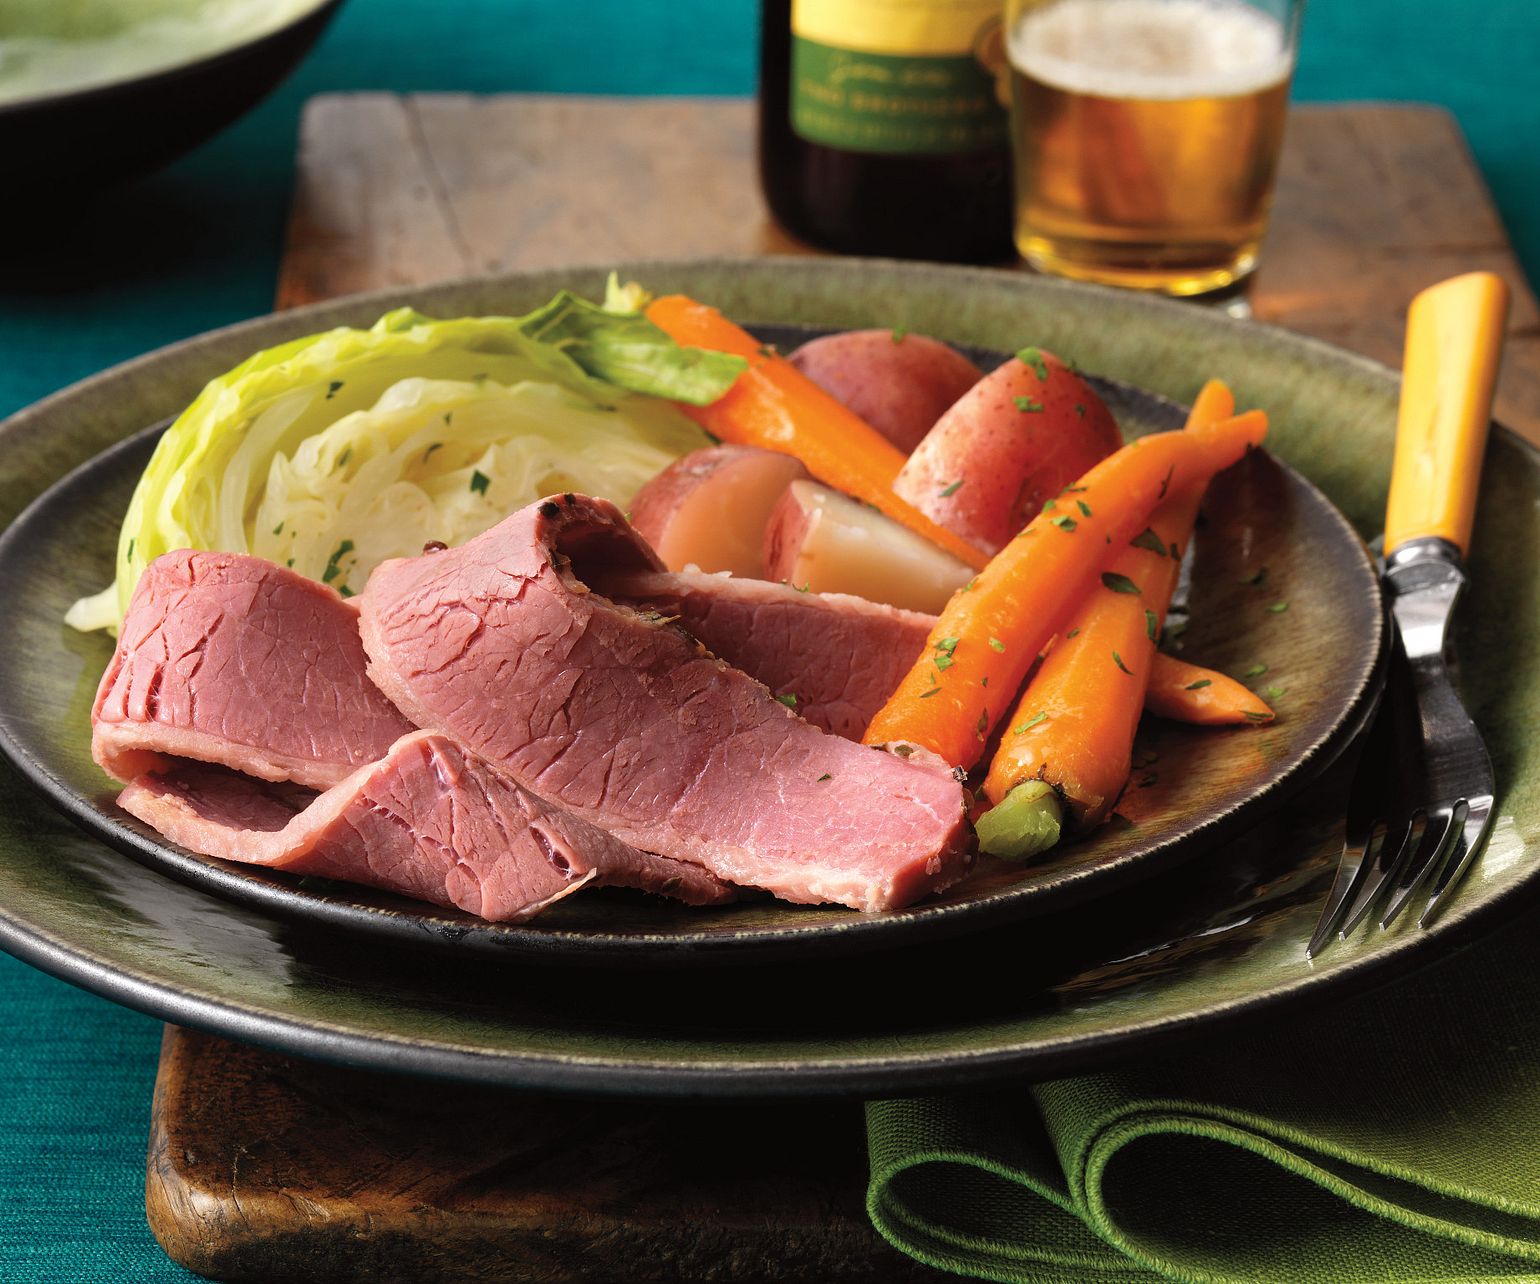 Corned Beef with Red Currant-Mustard Sauce